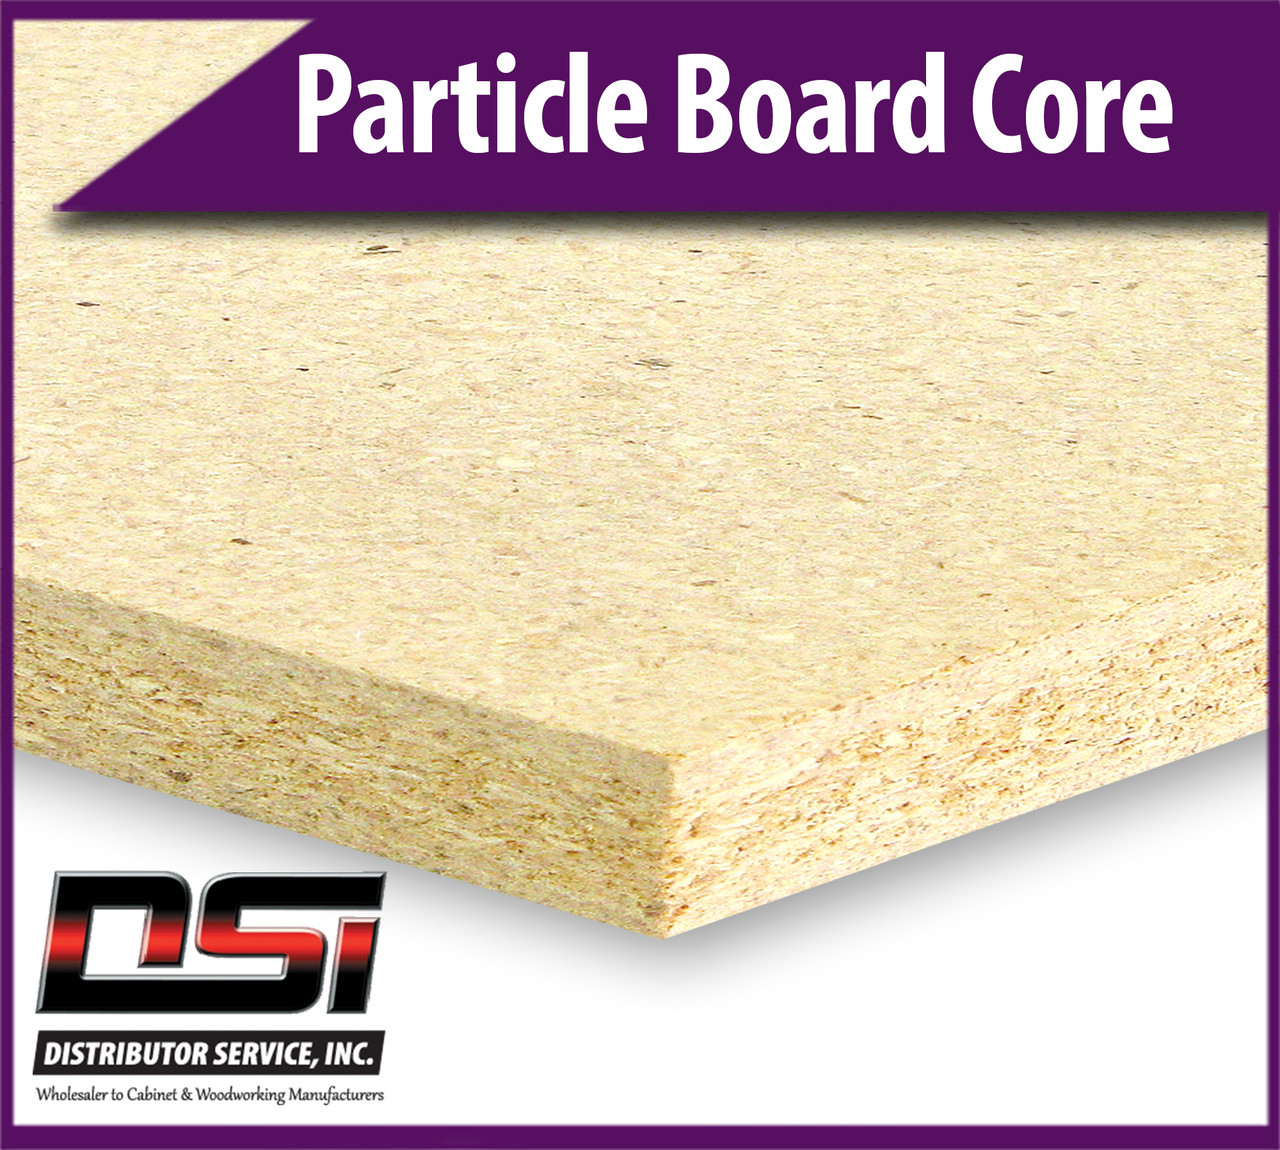 Particle Board Core 1" x 49" x 97" Industrial Particleboard Panels